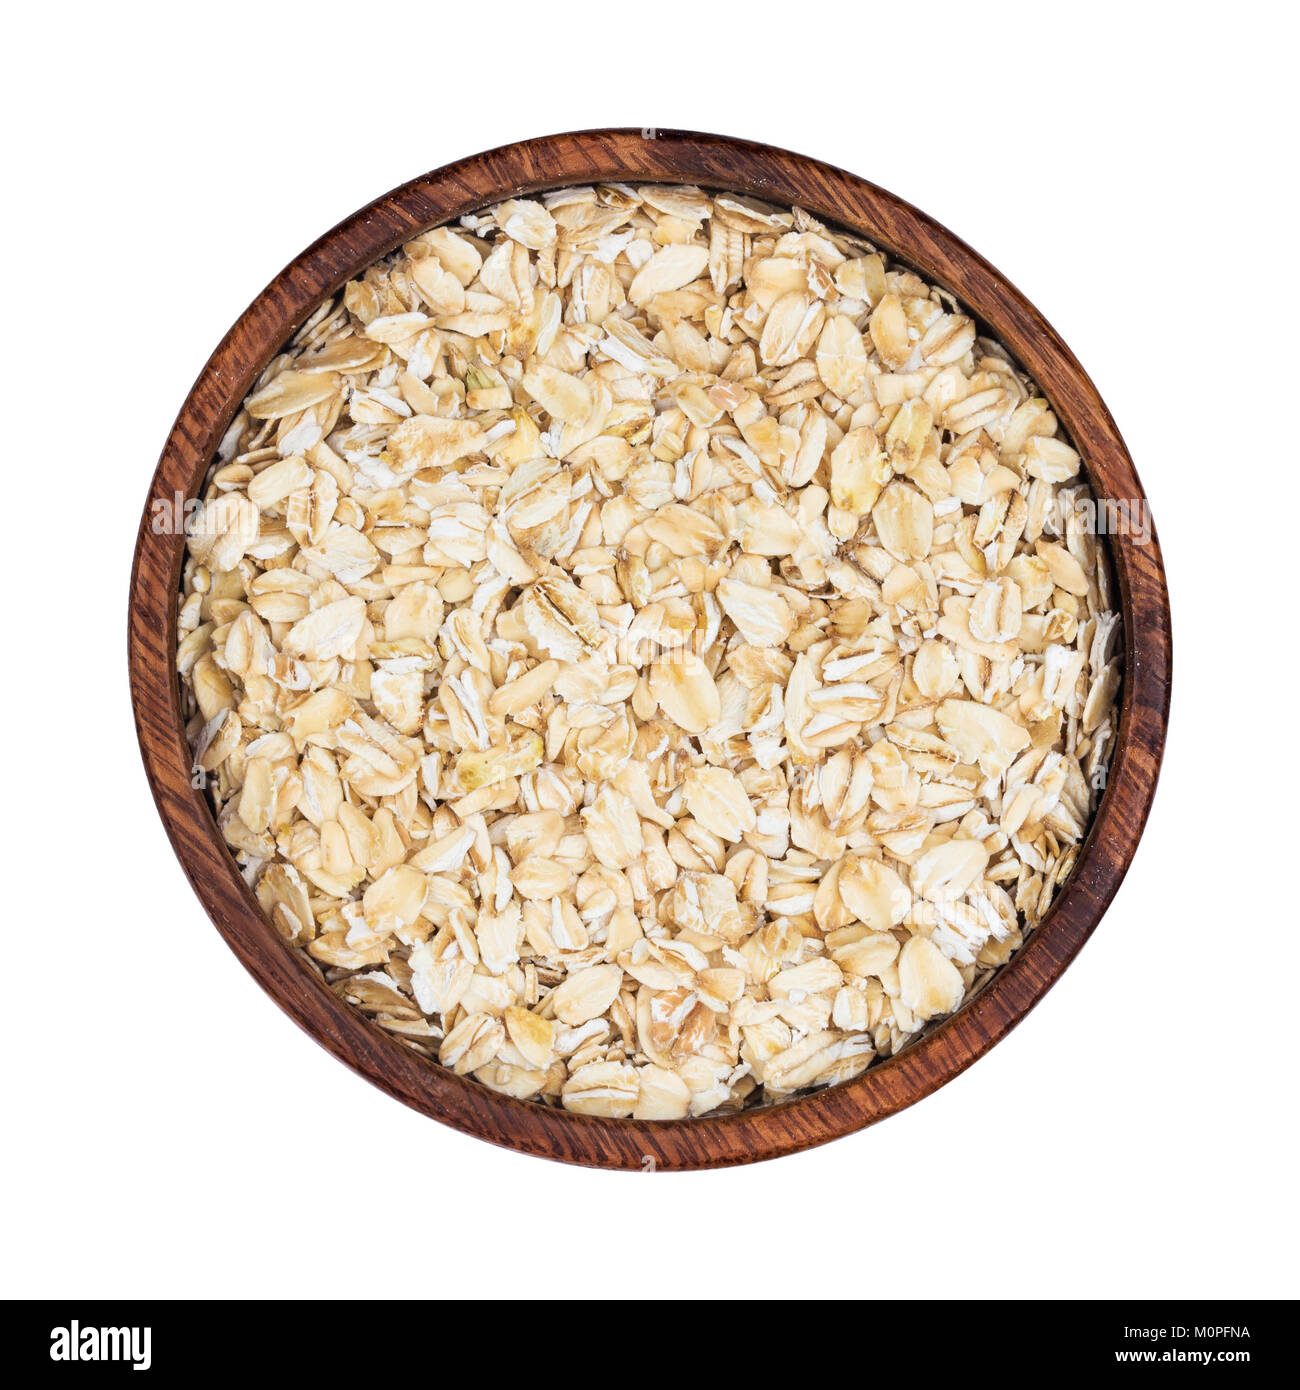 Oat flakes isolated on white background. Top view Stock Photo